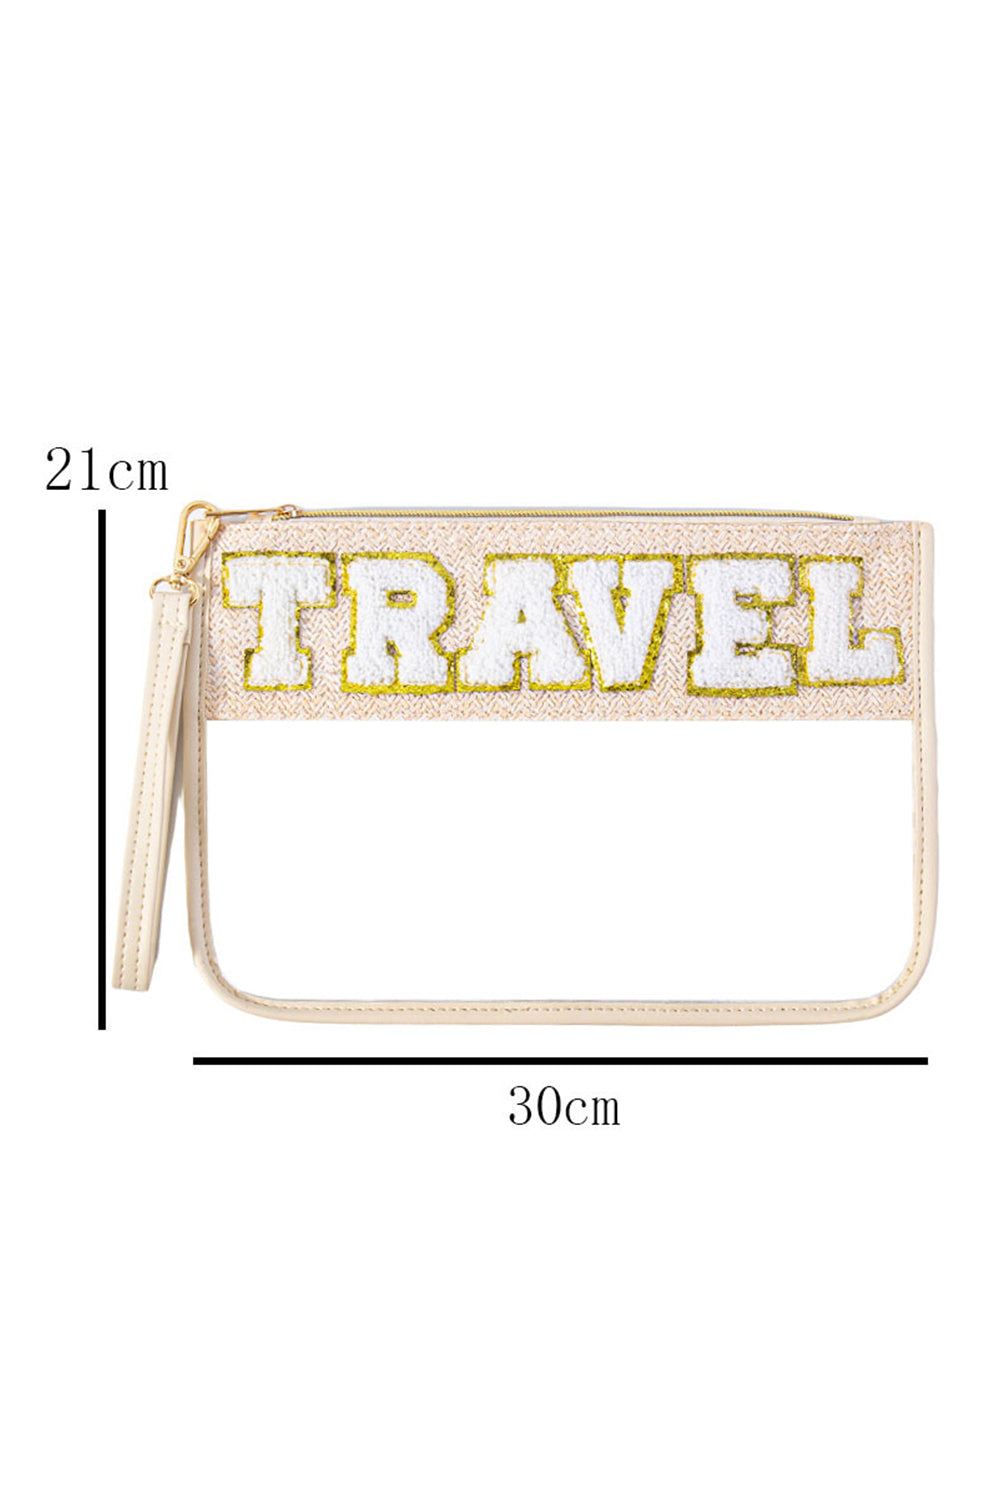 Beige TRAVEL Chenille Embroidered Clear PVC Storage Bag Makeup Bags JT's Designer Fashion